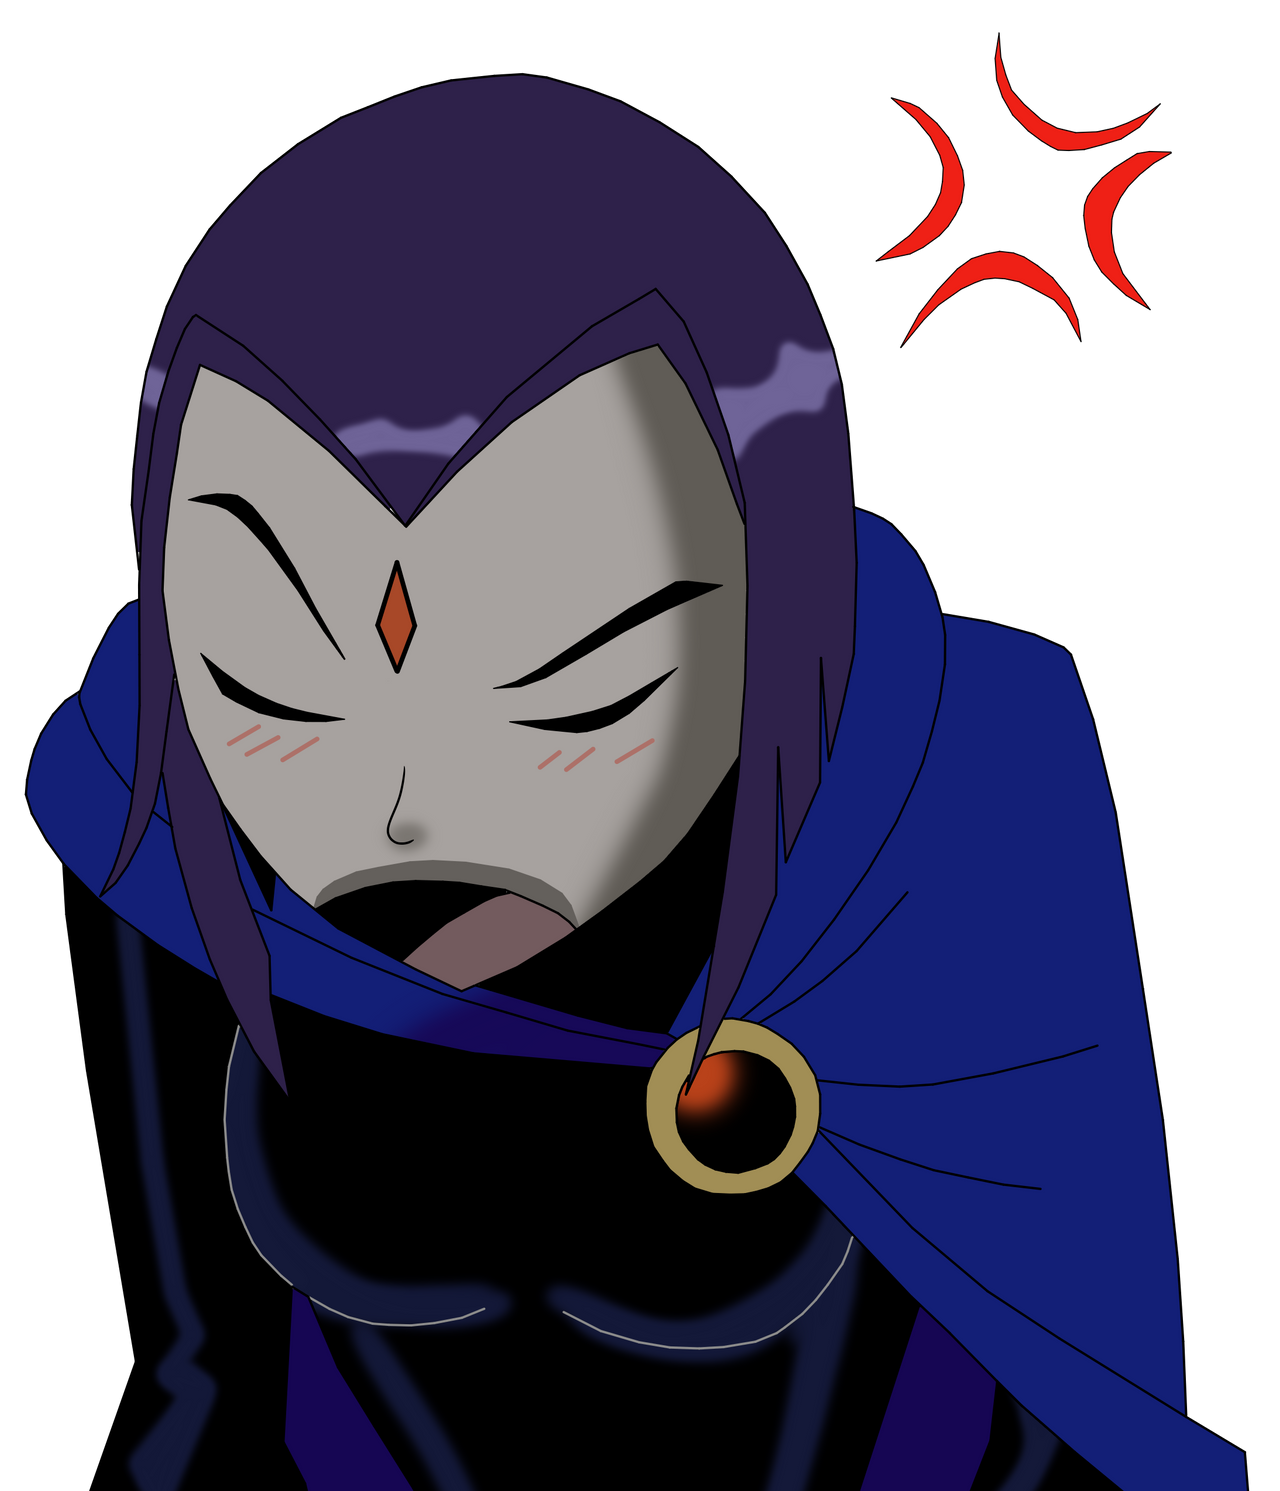 Raven Anime Irritated by CaptainEdwardTeague on DeviantArt